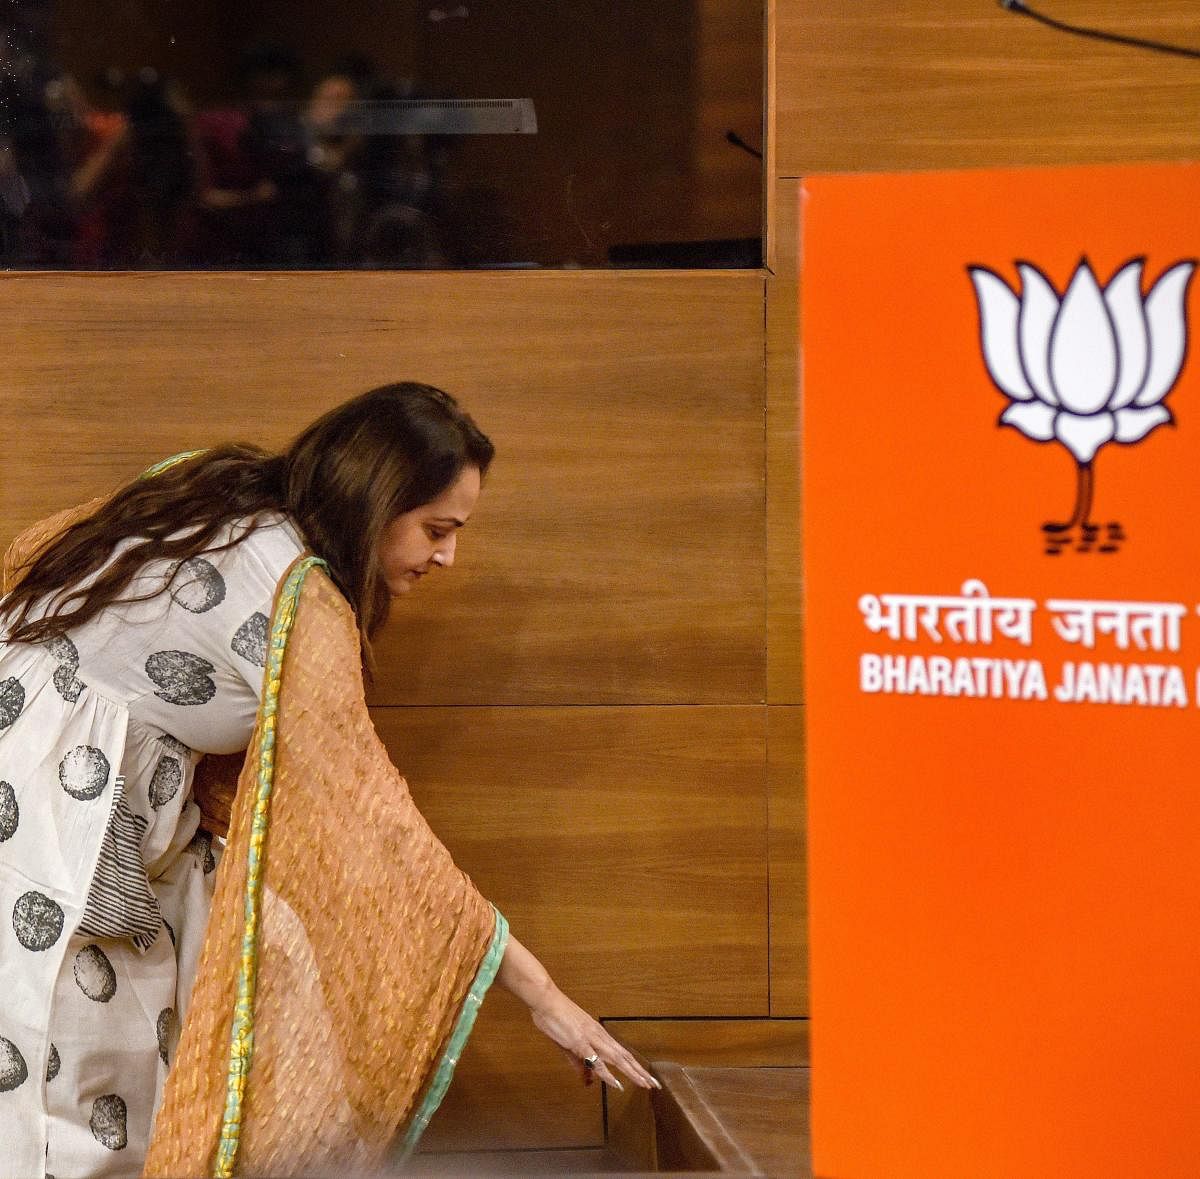 Veteran actor and former MP Jaya Prada touches the floor before stepping on the dais as she arrives to join the BJP in New Delhi on Tuesday. PTI